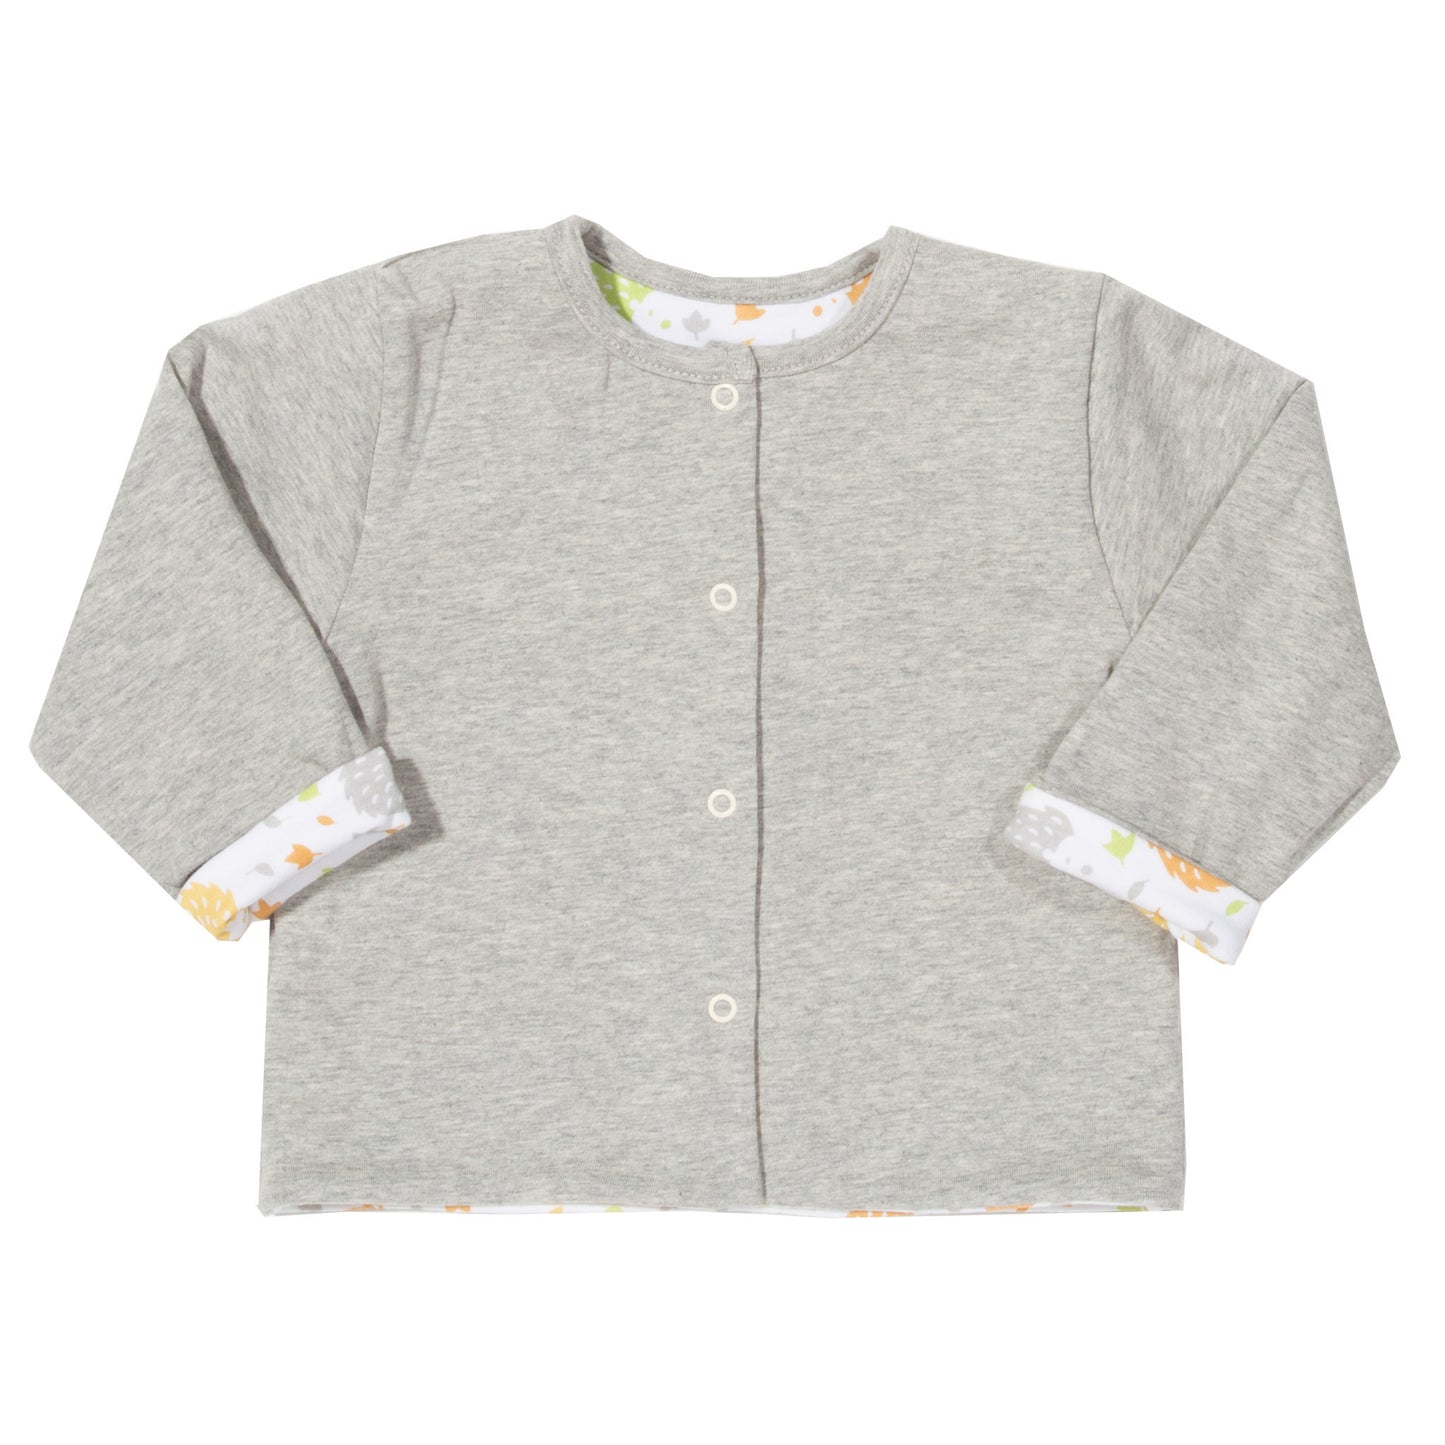 Grey jacket with inside print of orange and green hedgehogs